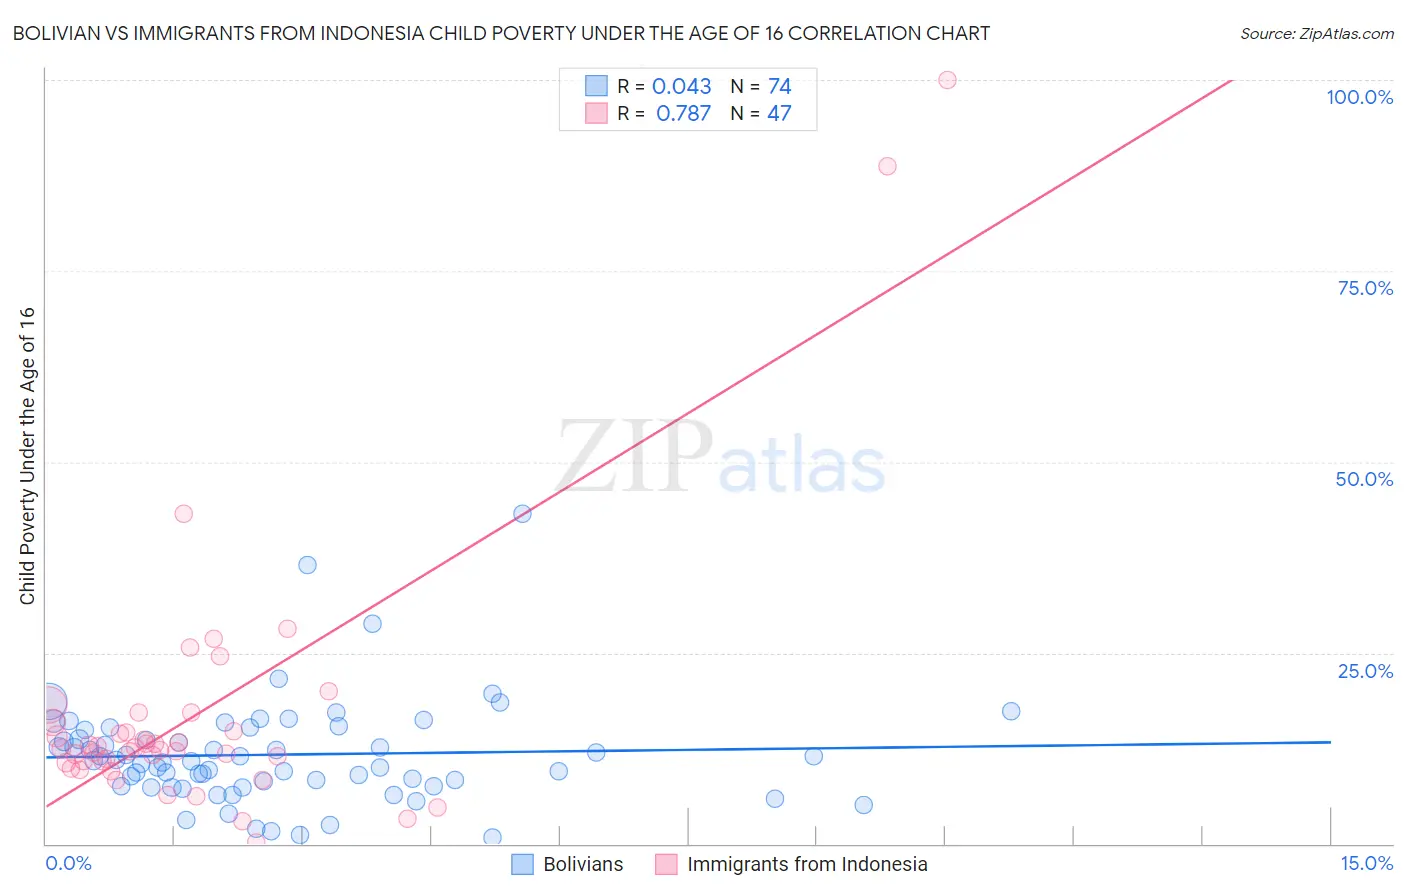 Bolivian vs Immigrants from Indonesia Child Poverty Under the Age of 16